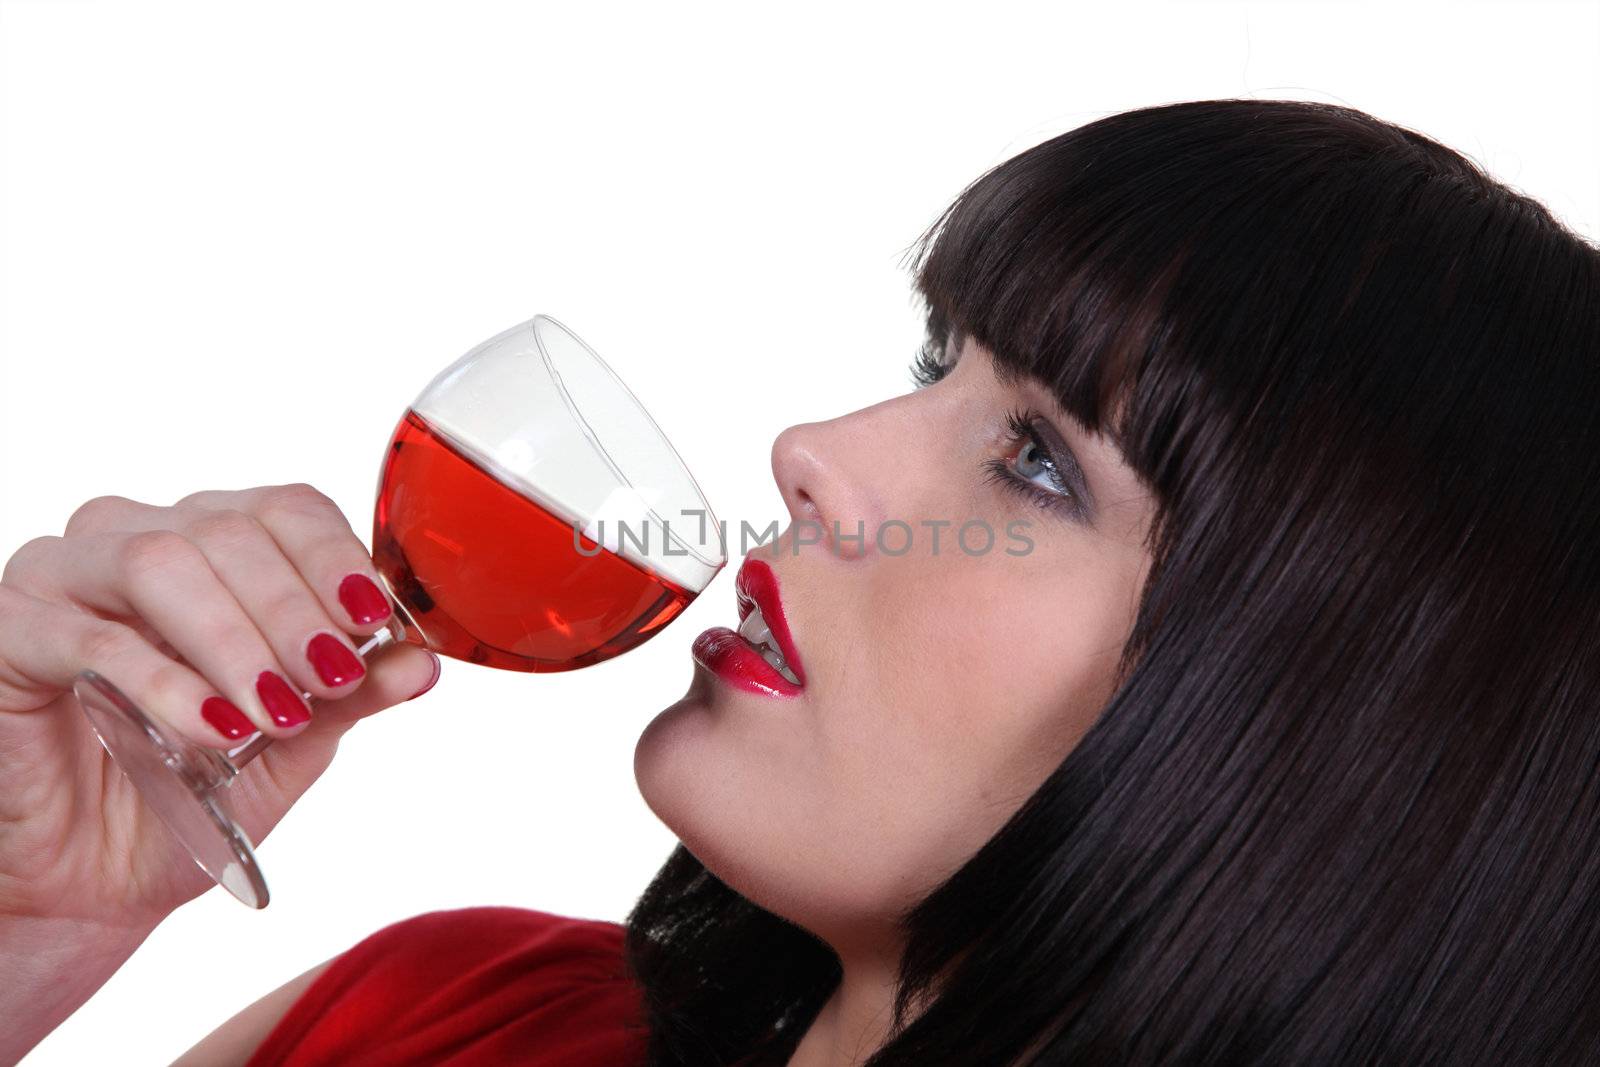 Striking shot of a woman drinking a glass of wine